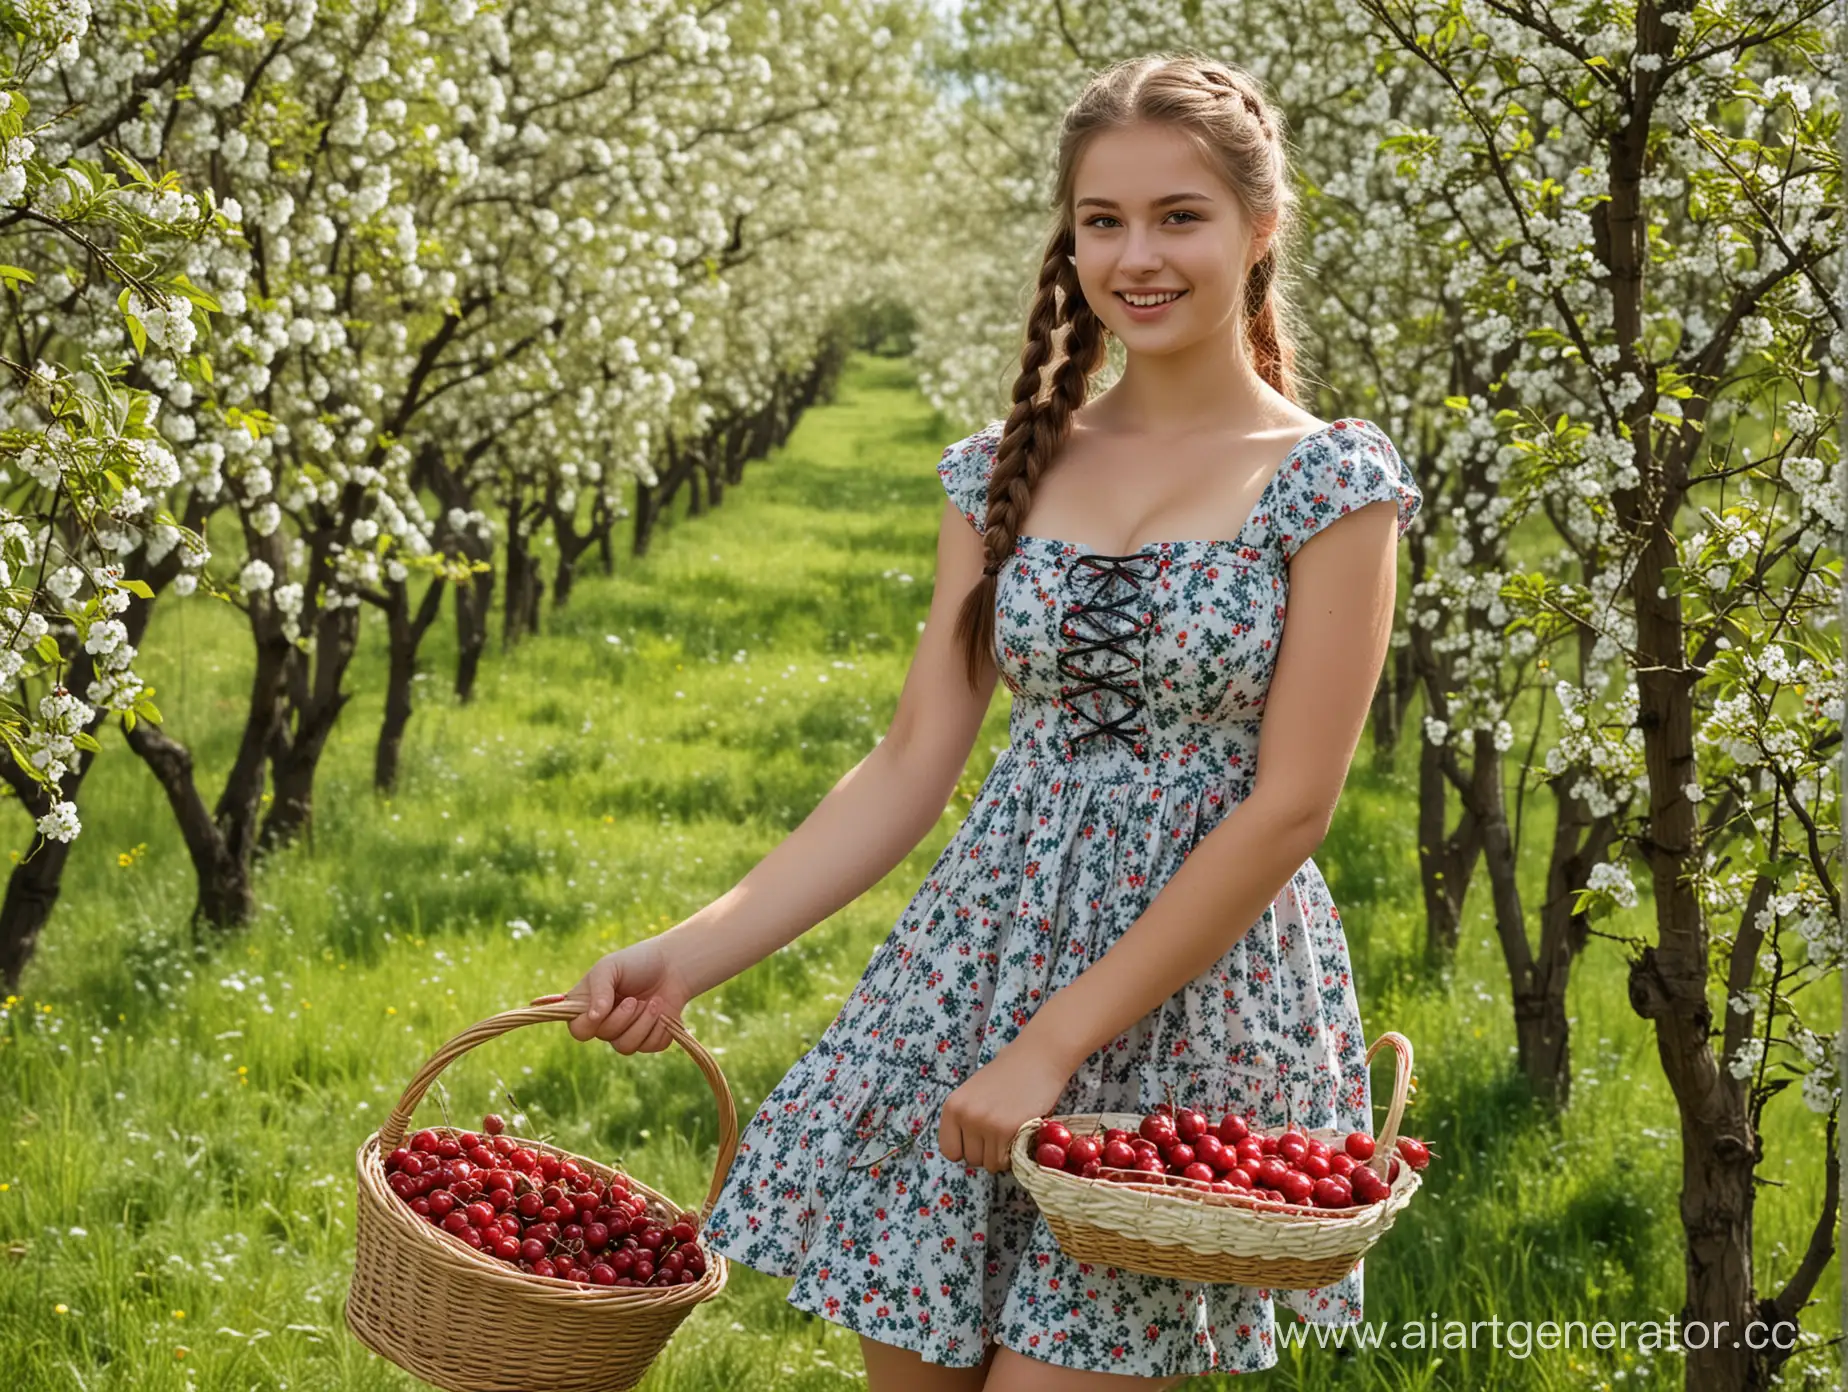 Russian-Rural-Girl-in-Calico-Sundress-with-Cherries